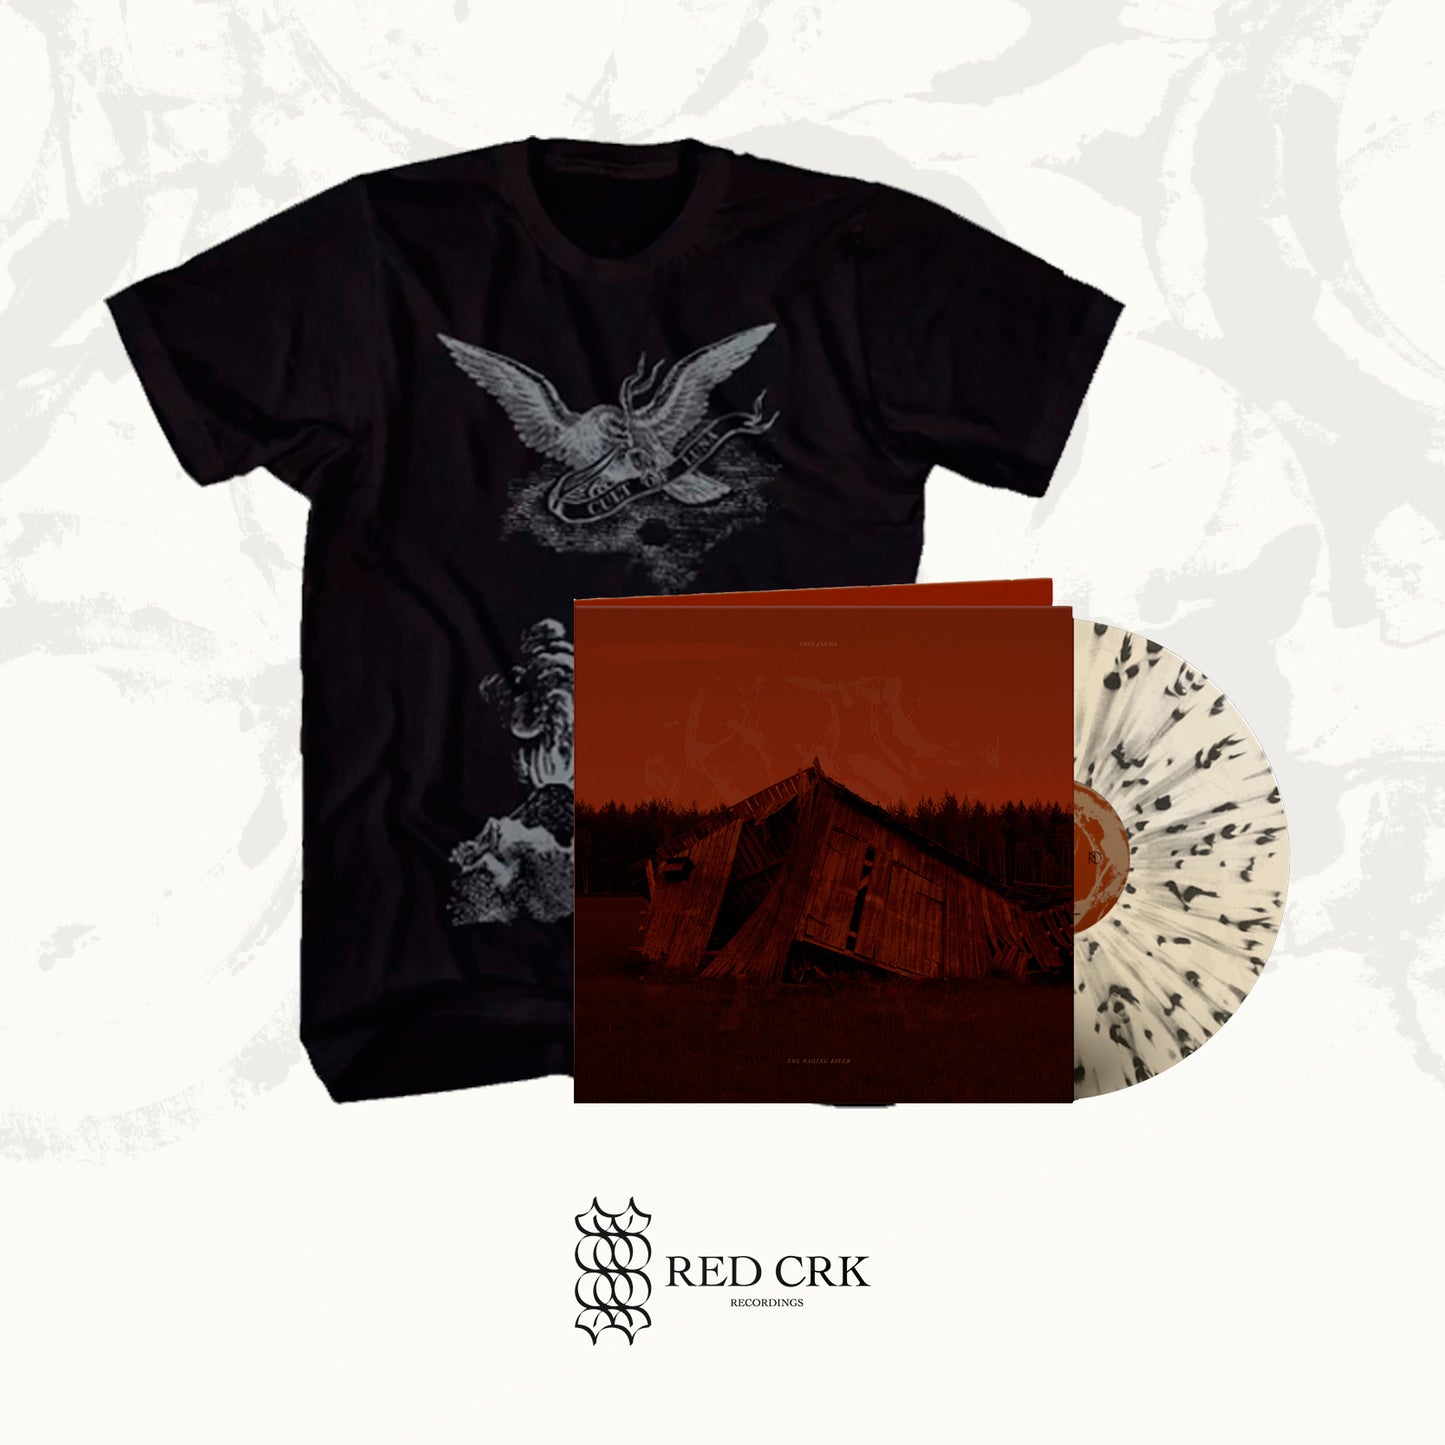 CULT OF LUNA - The Raging River LP Gtfold (Milky Clear vinyl w/ Black Speckles) +  Mighty Eagle (Silver) T-Shirt